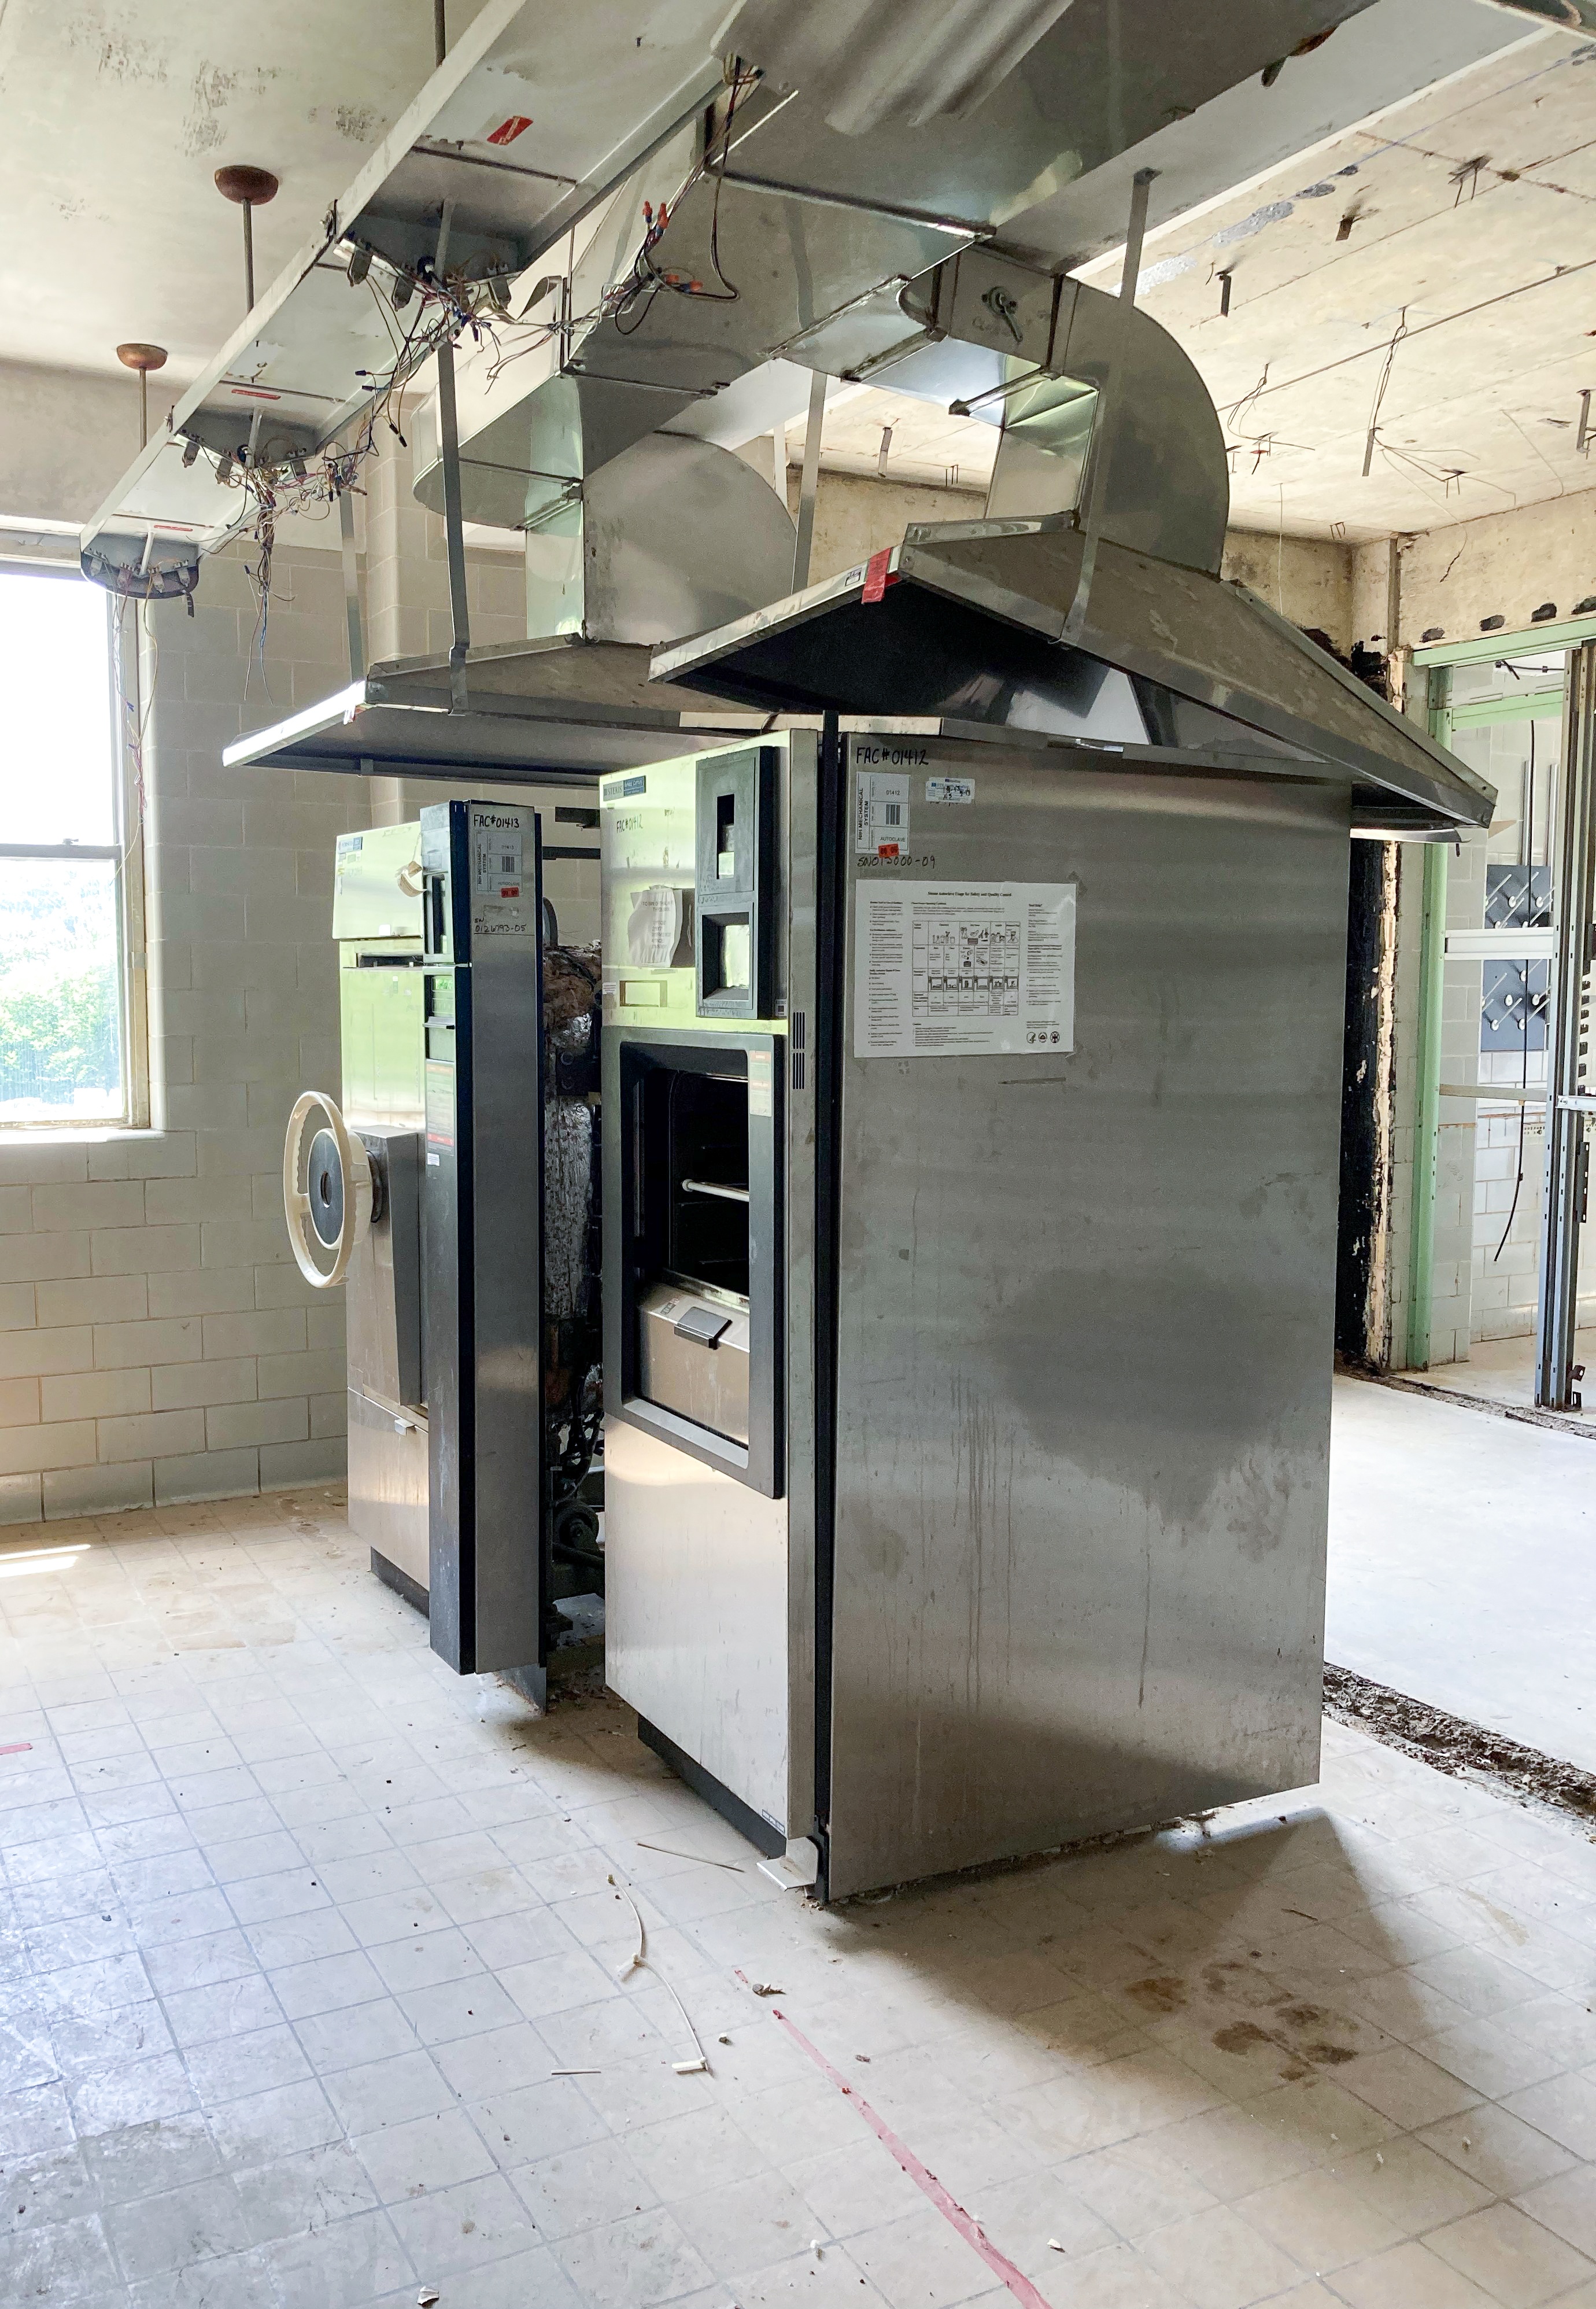 two autoclaves in the building appear to be disconnected and ready to move out of the building.